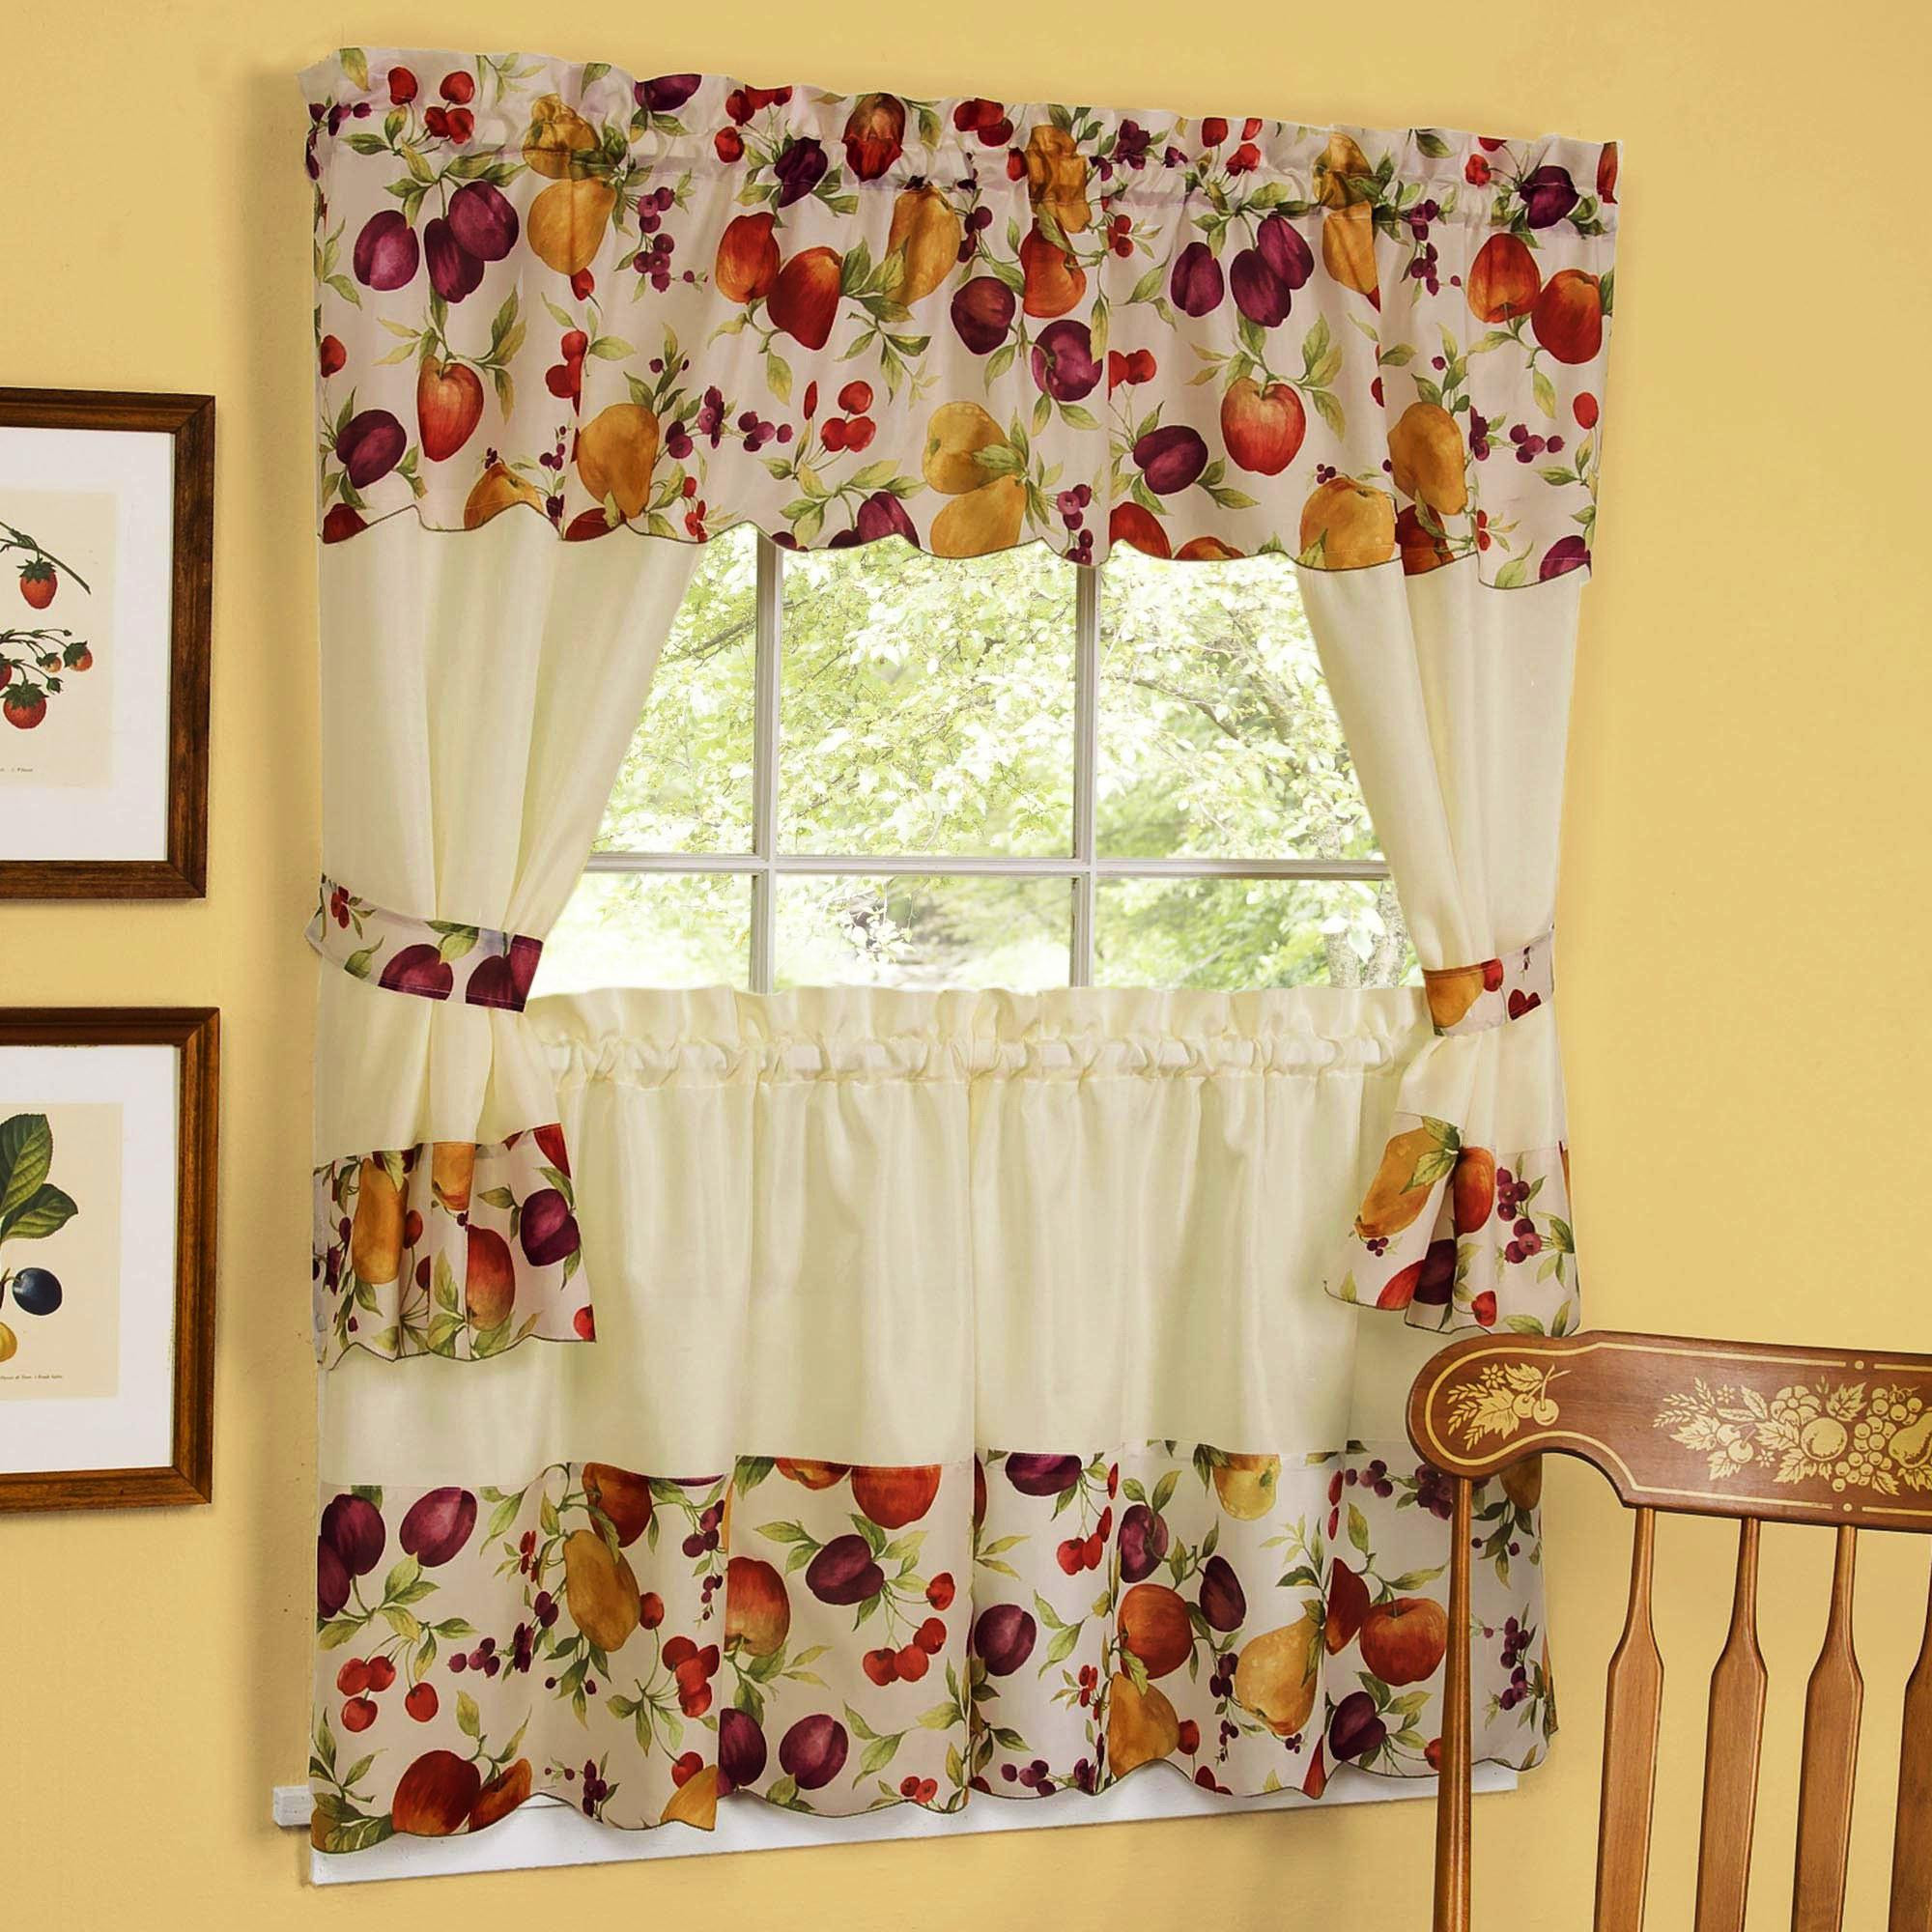 Apple Curtains For Kitchen
 Apple Kitchen Curtains Valance The Creative Room Design